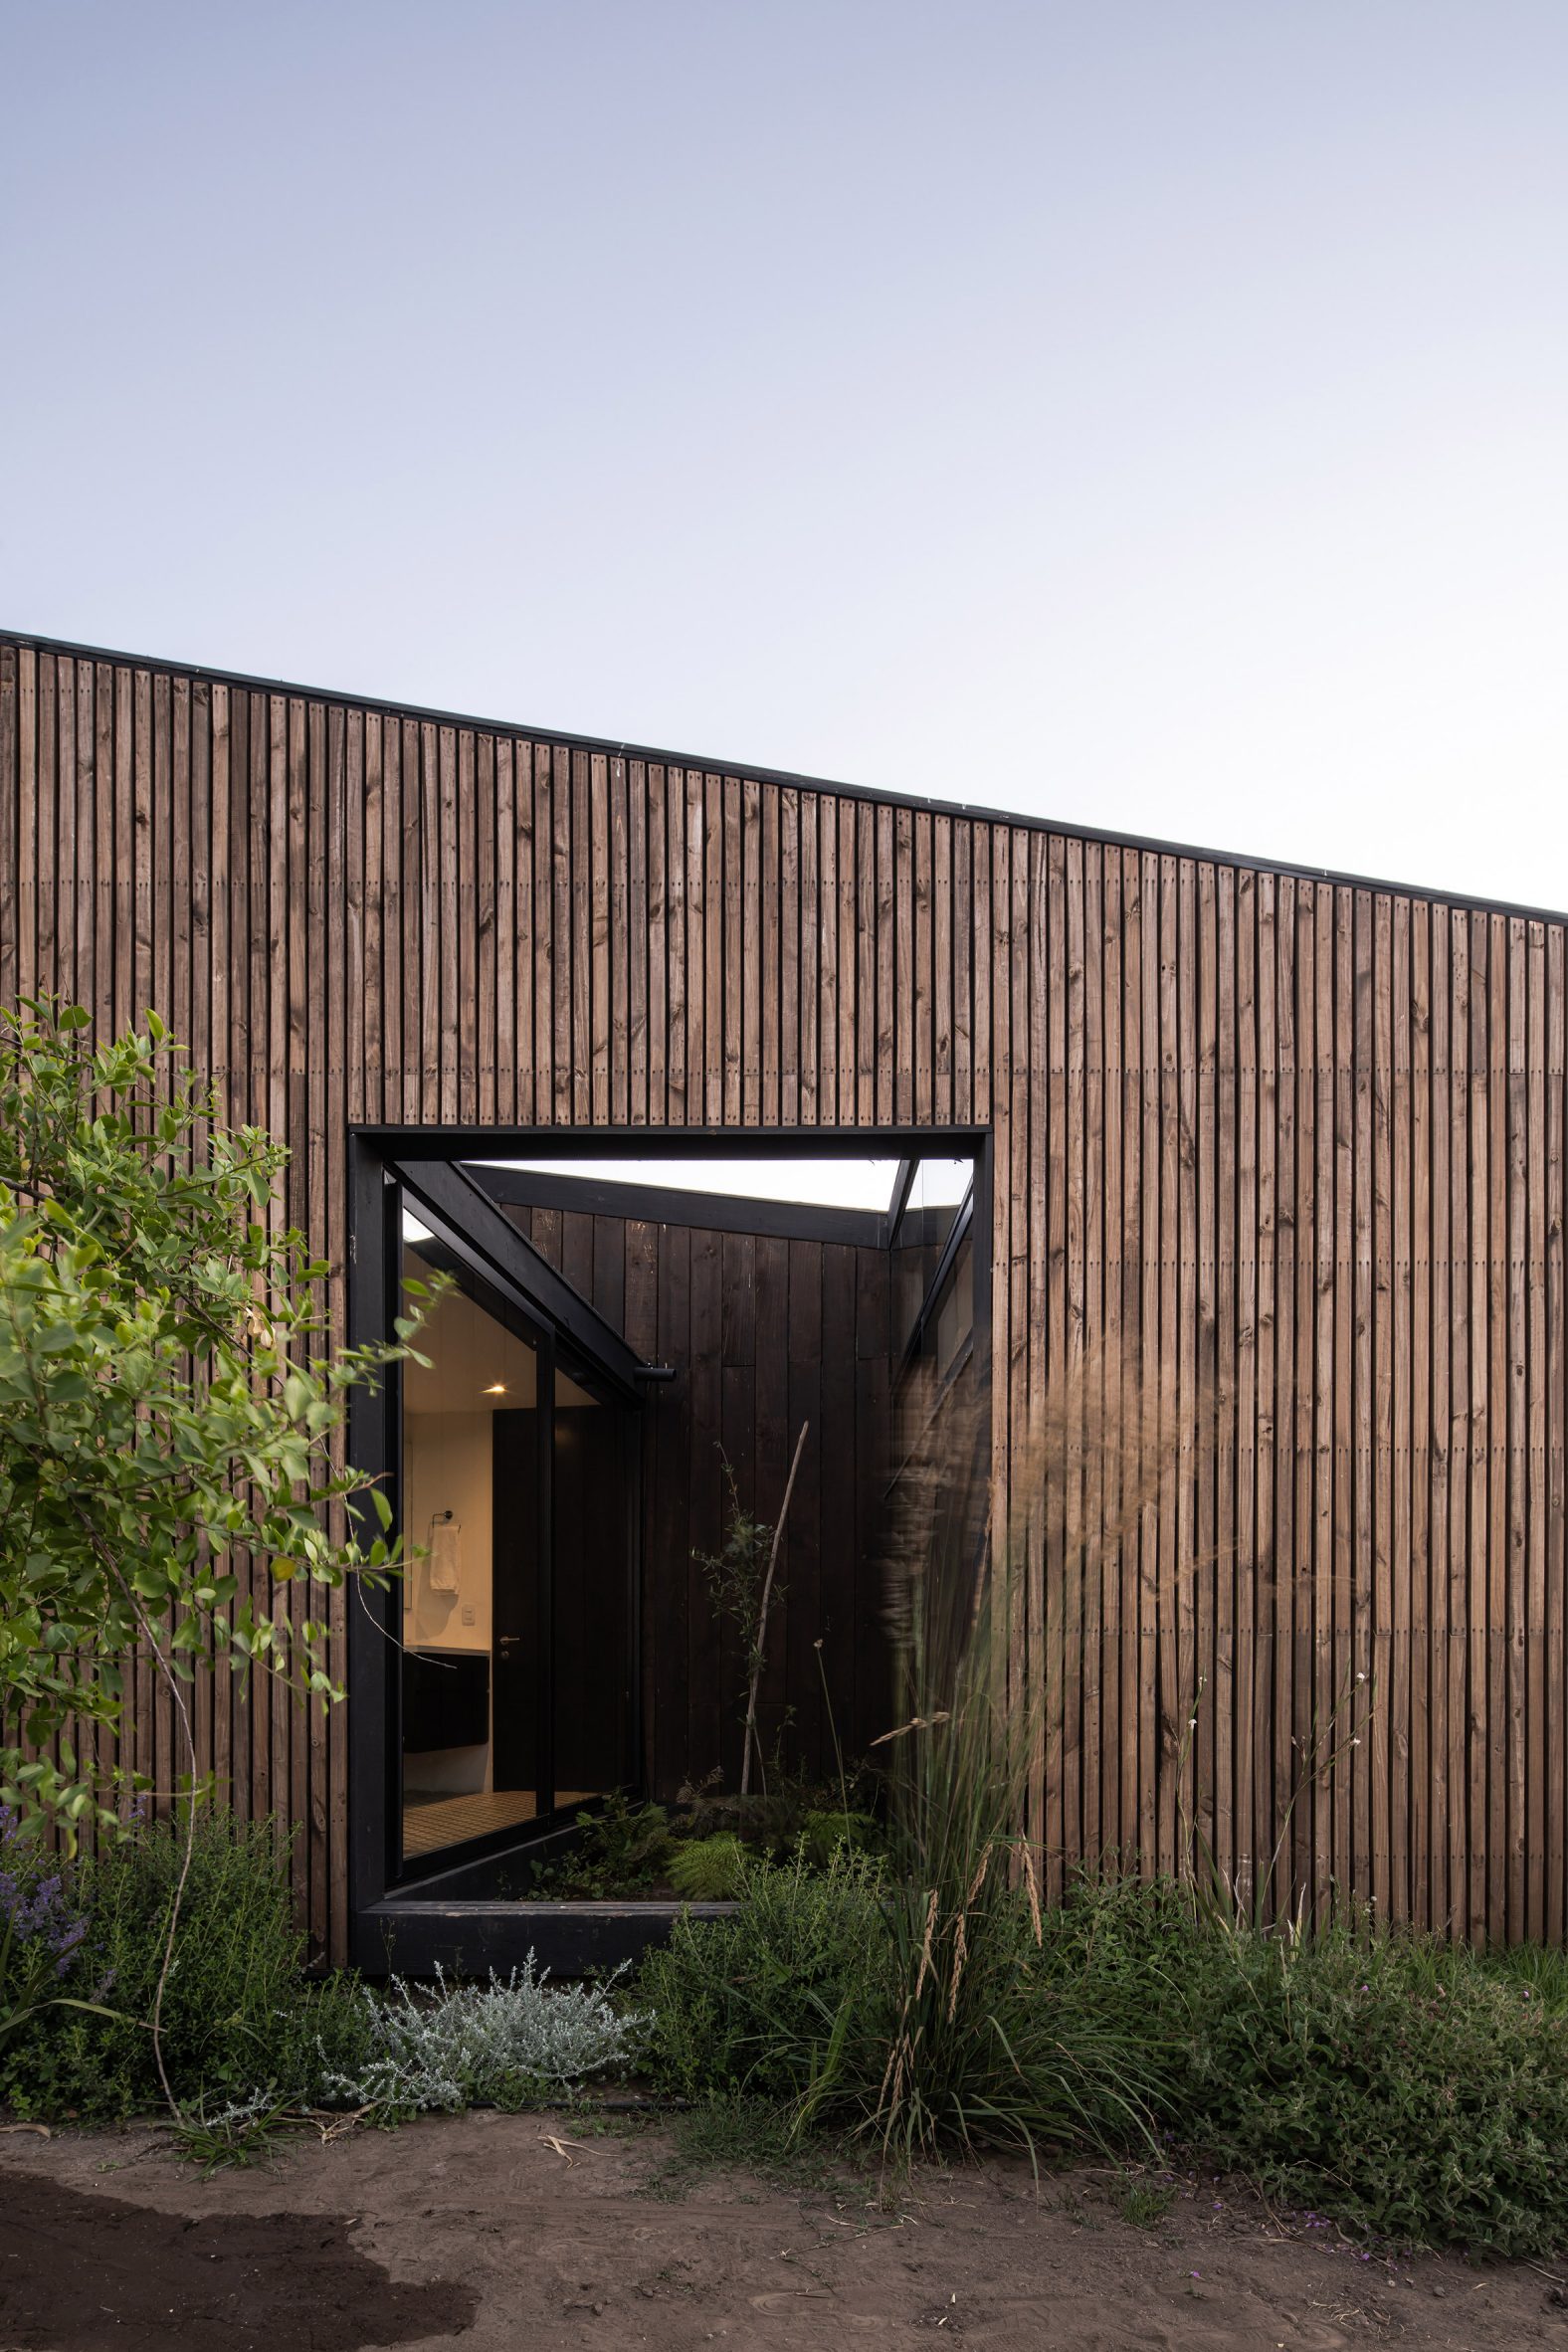 Exterior of a timber-clad home with a sloped roof and rectangular opening